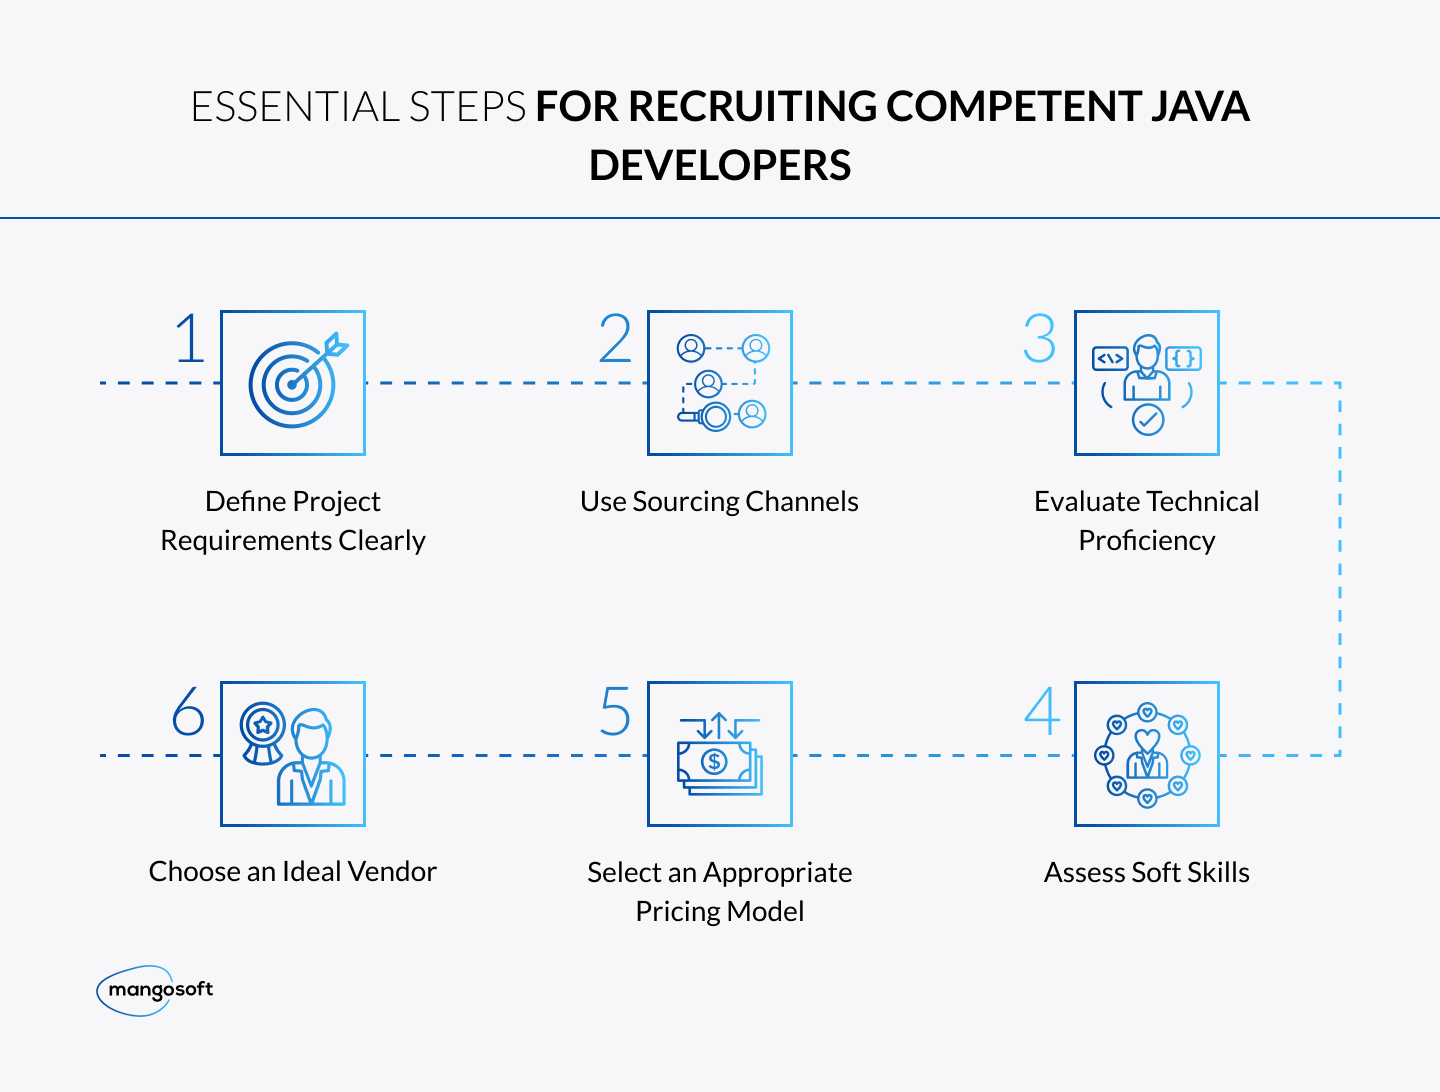 7 Signs You Should Offshore Your Java Development - 9